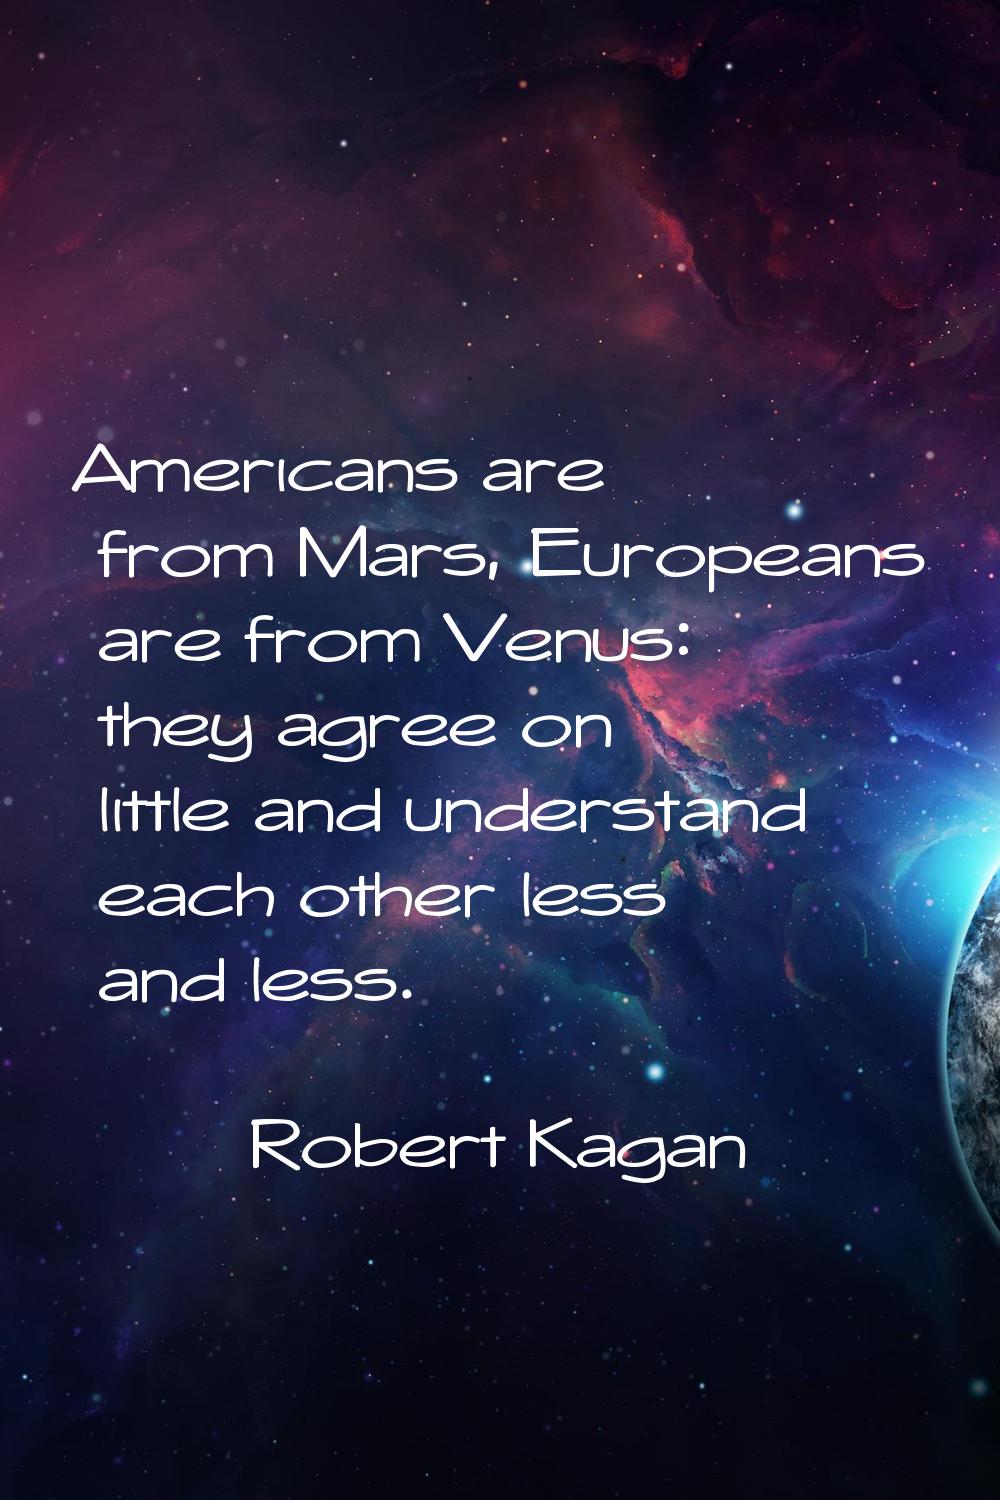 Americans are from Mars, Europeans are from Venus: they agree on little and understand each other l